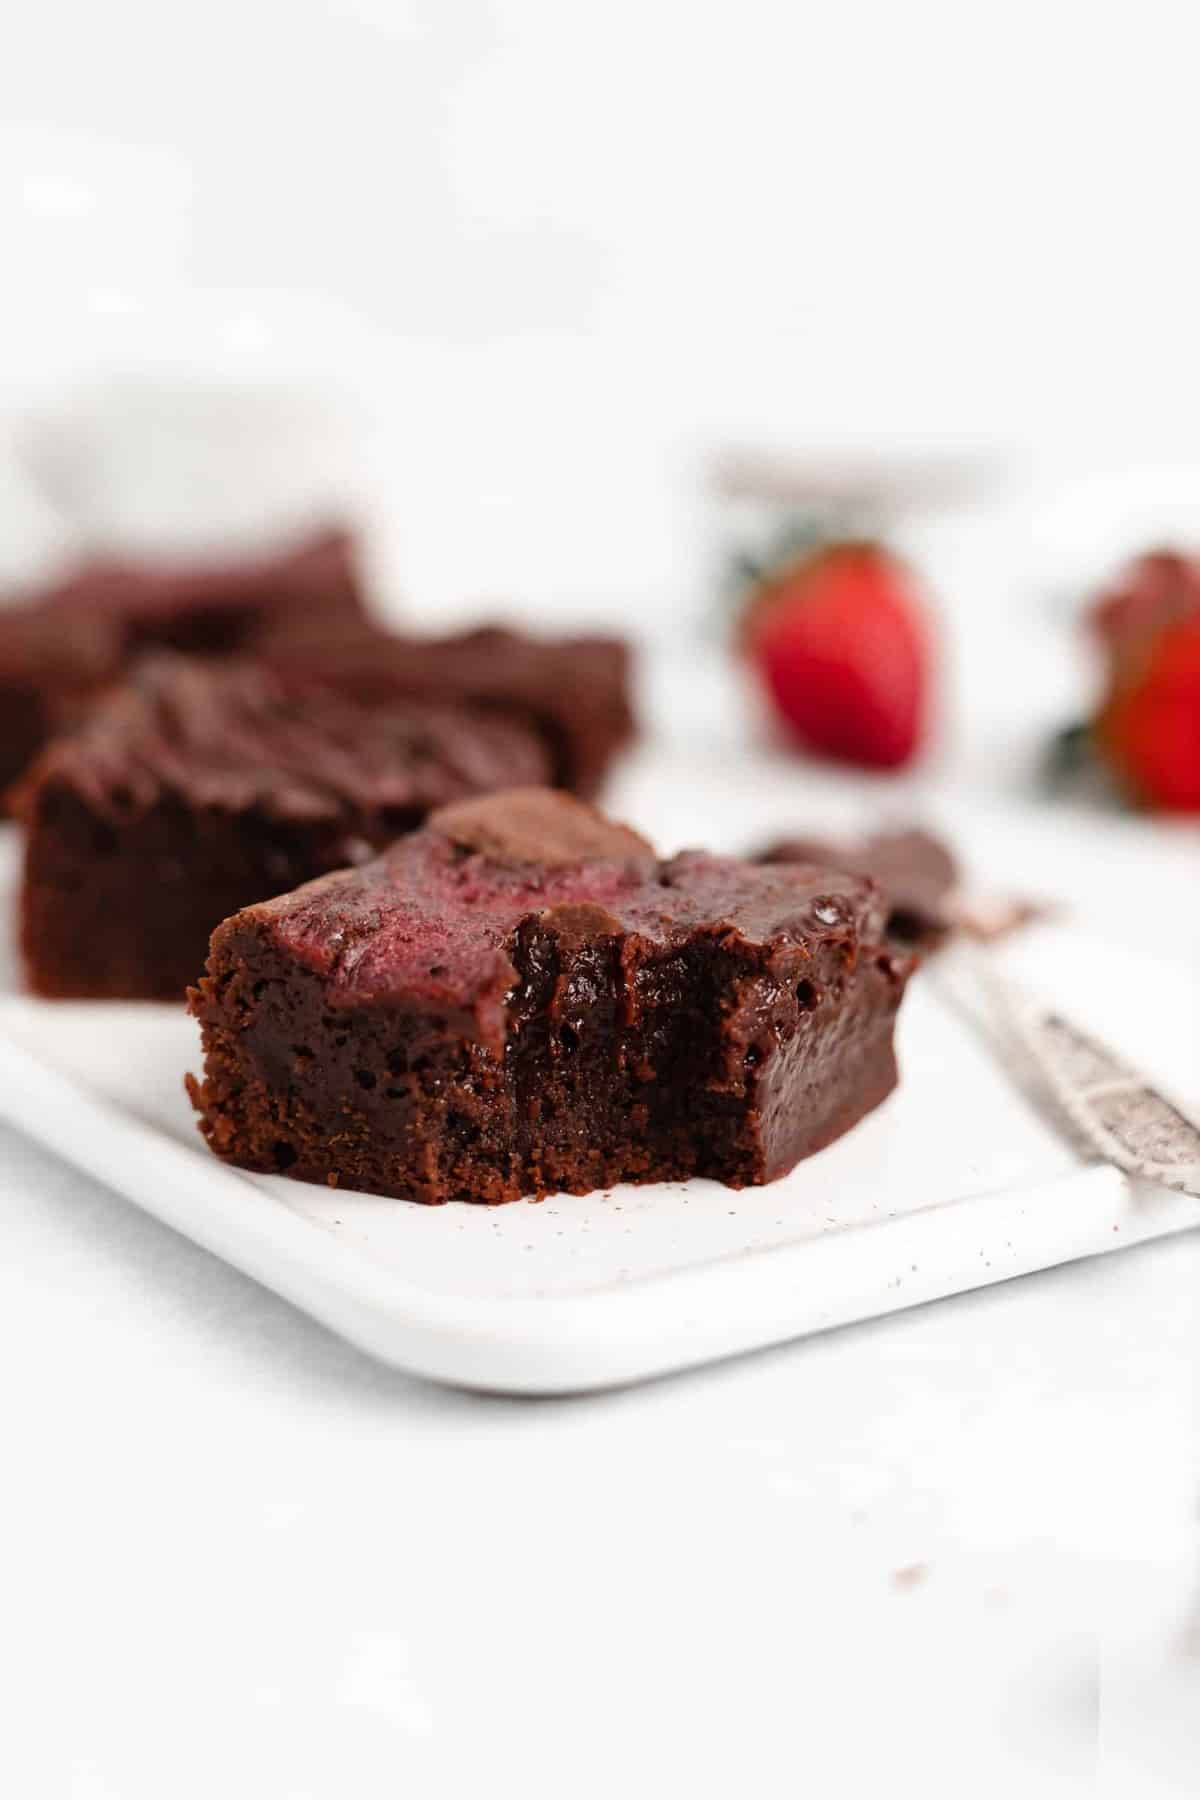 The BEST Strawberry Swirl Fudge Brownies - These brownies are decadent, rich, and chocolatey with a colorful and delicious strawberry swirl!